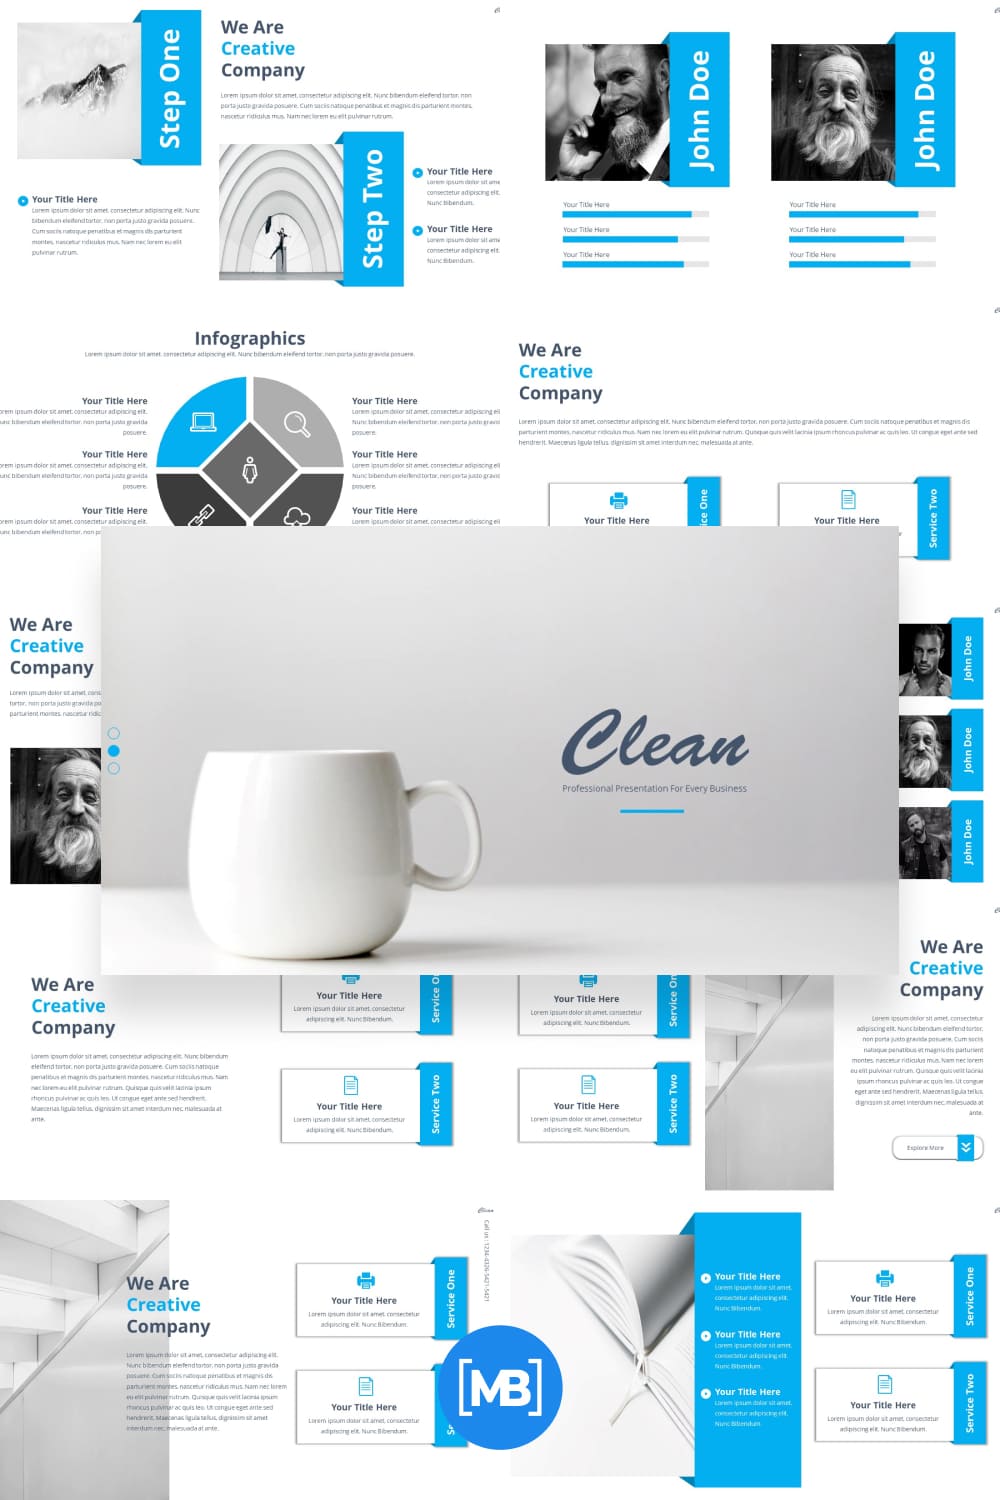 Classic template in blue and white with a large collection of infographics.